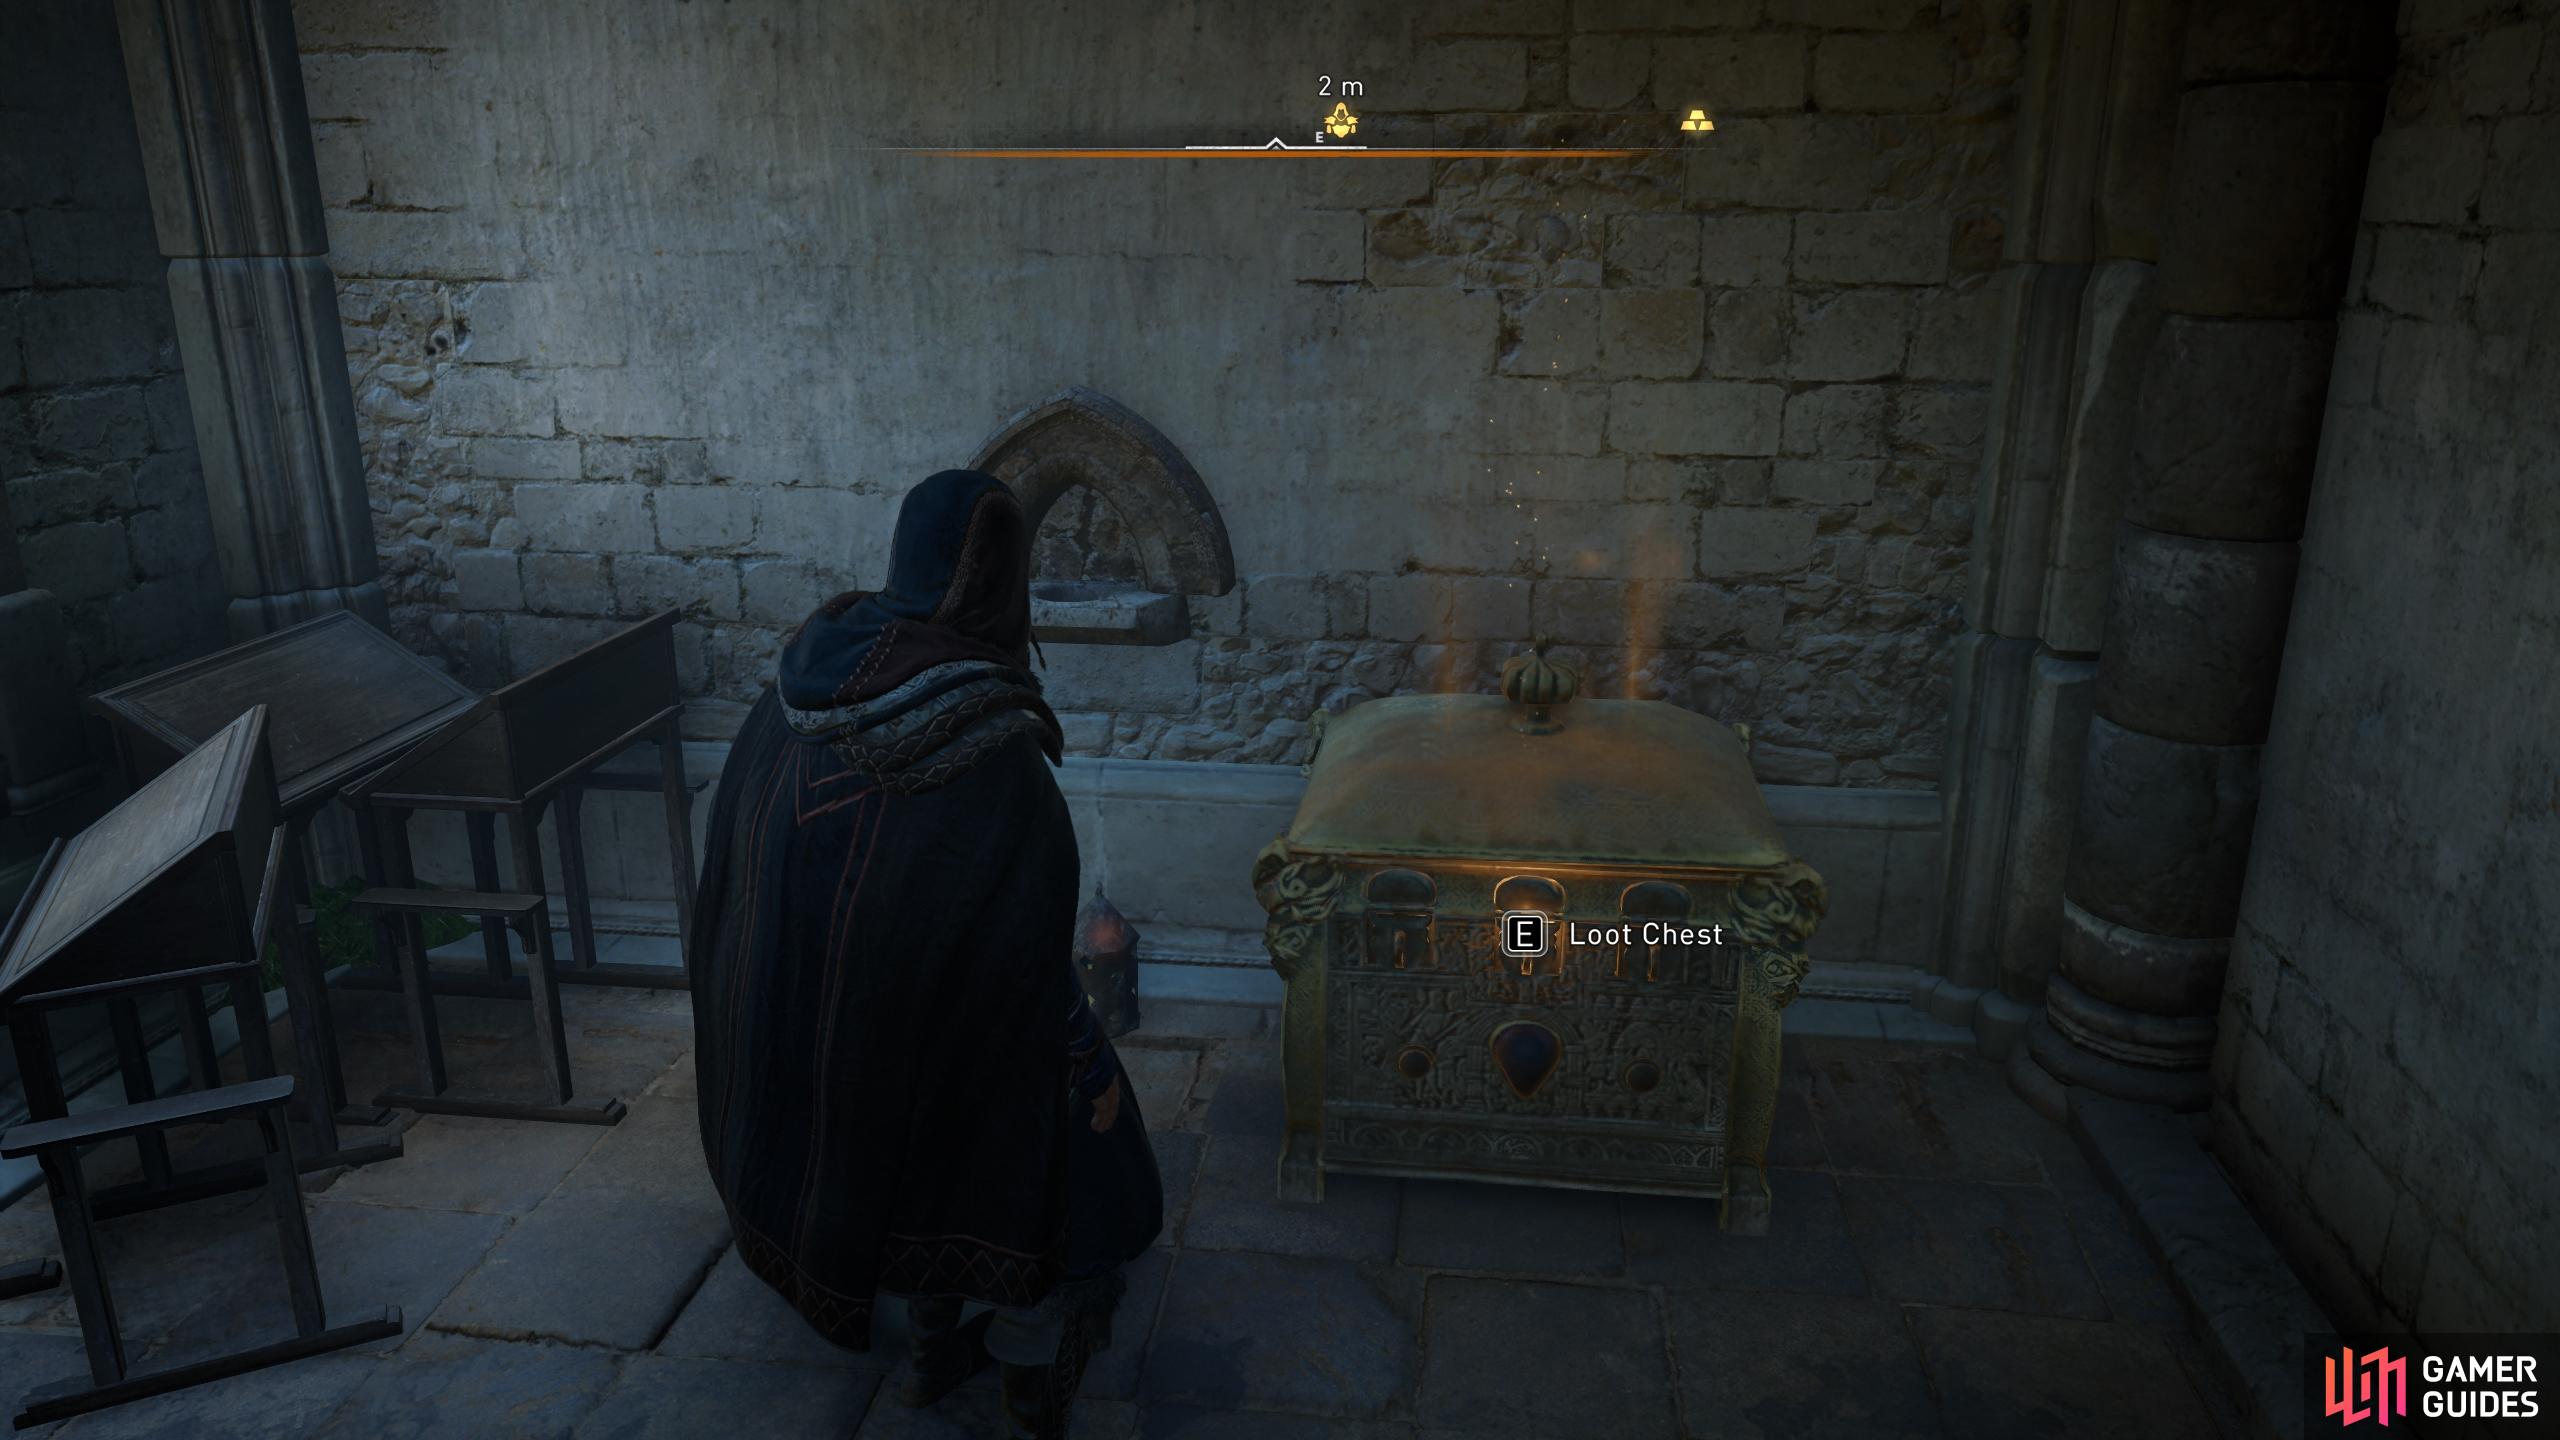 You'll find the chest at the eastern end of the room on the northern side of the church.